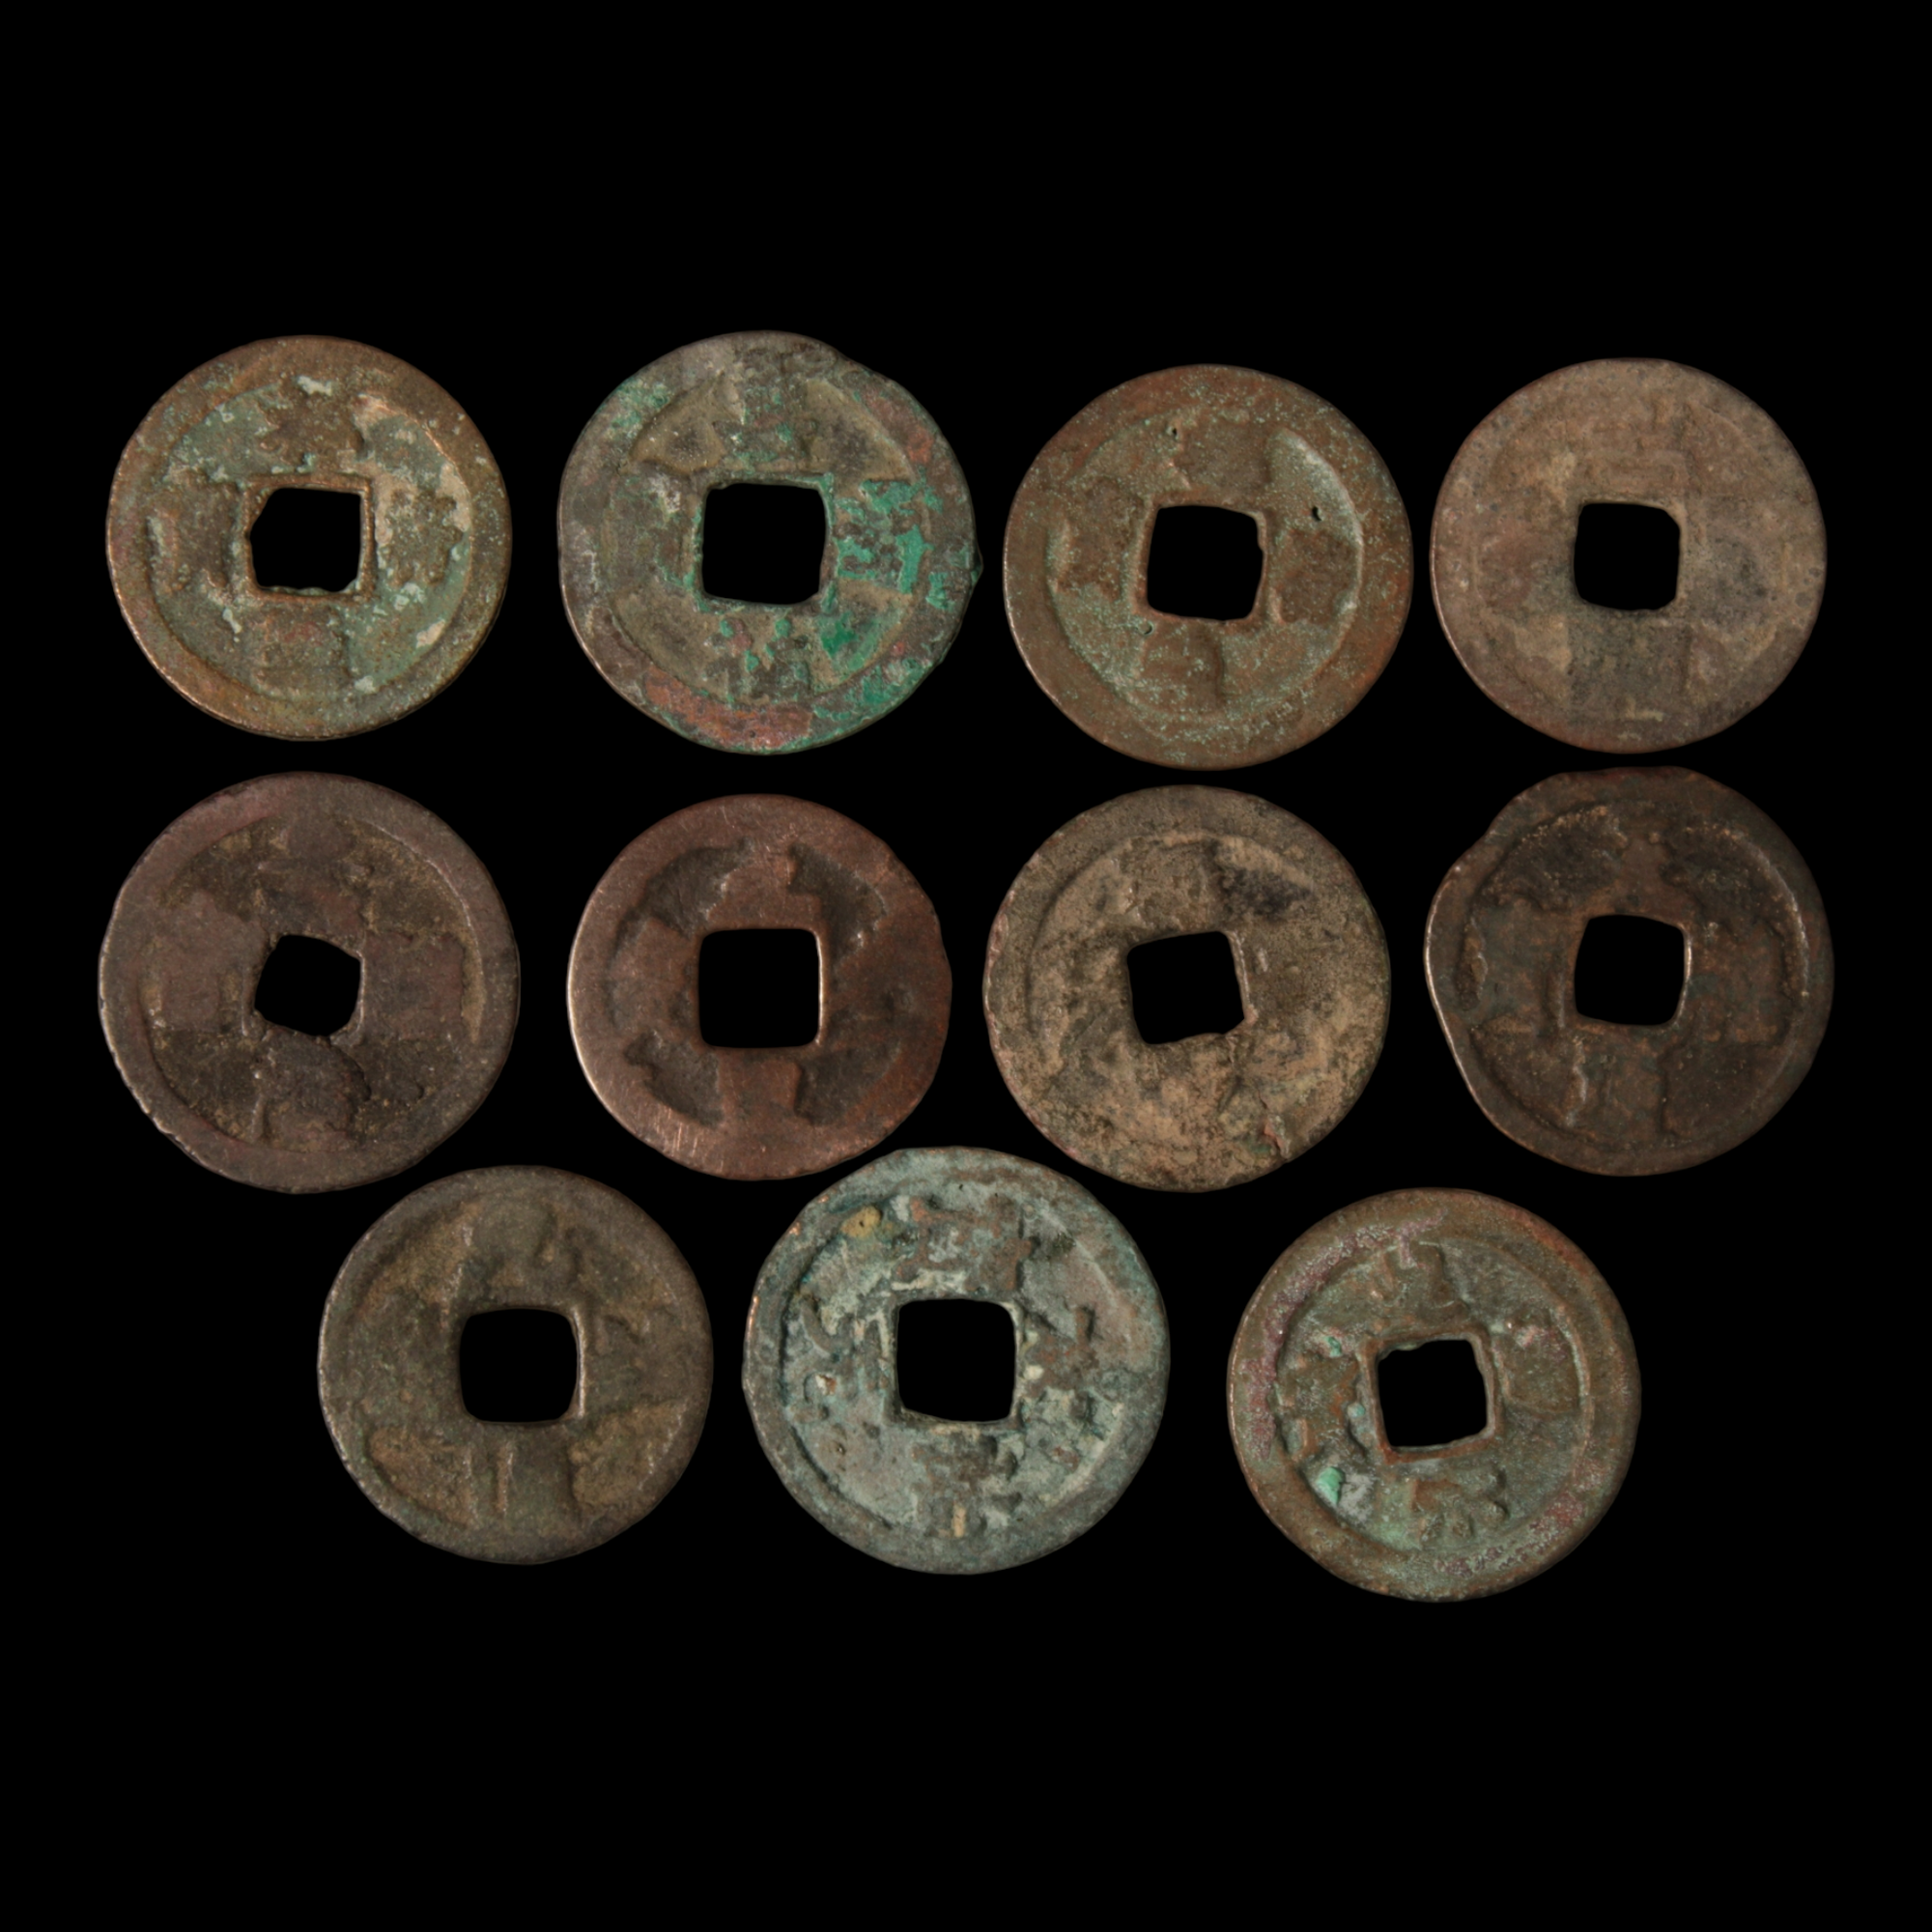 Song Dynasty Cash Coins Lot #4 - 960 to 1279 CE - China - 3/29/23 Auction